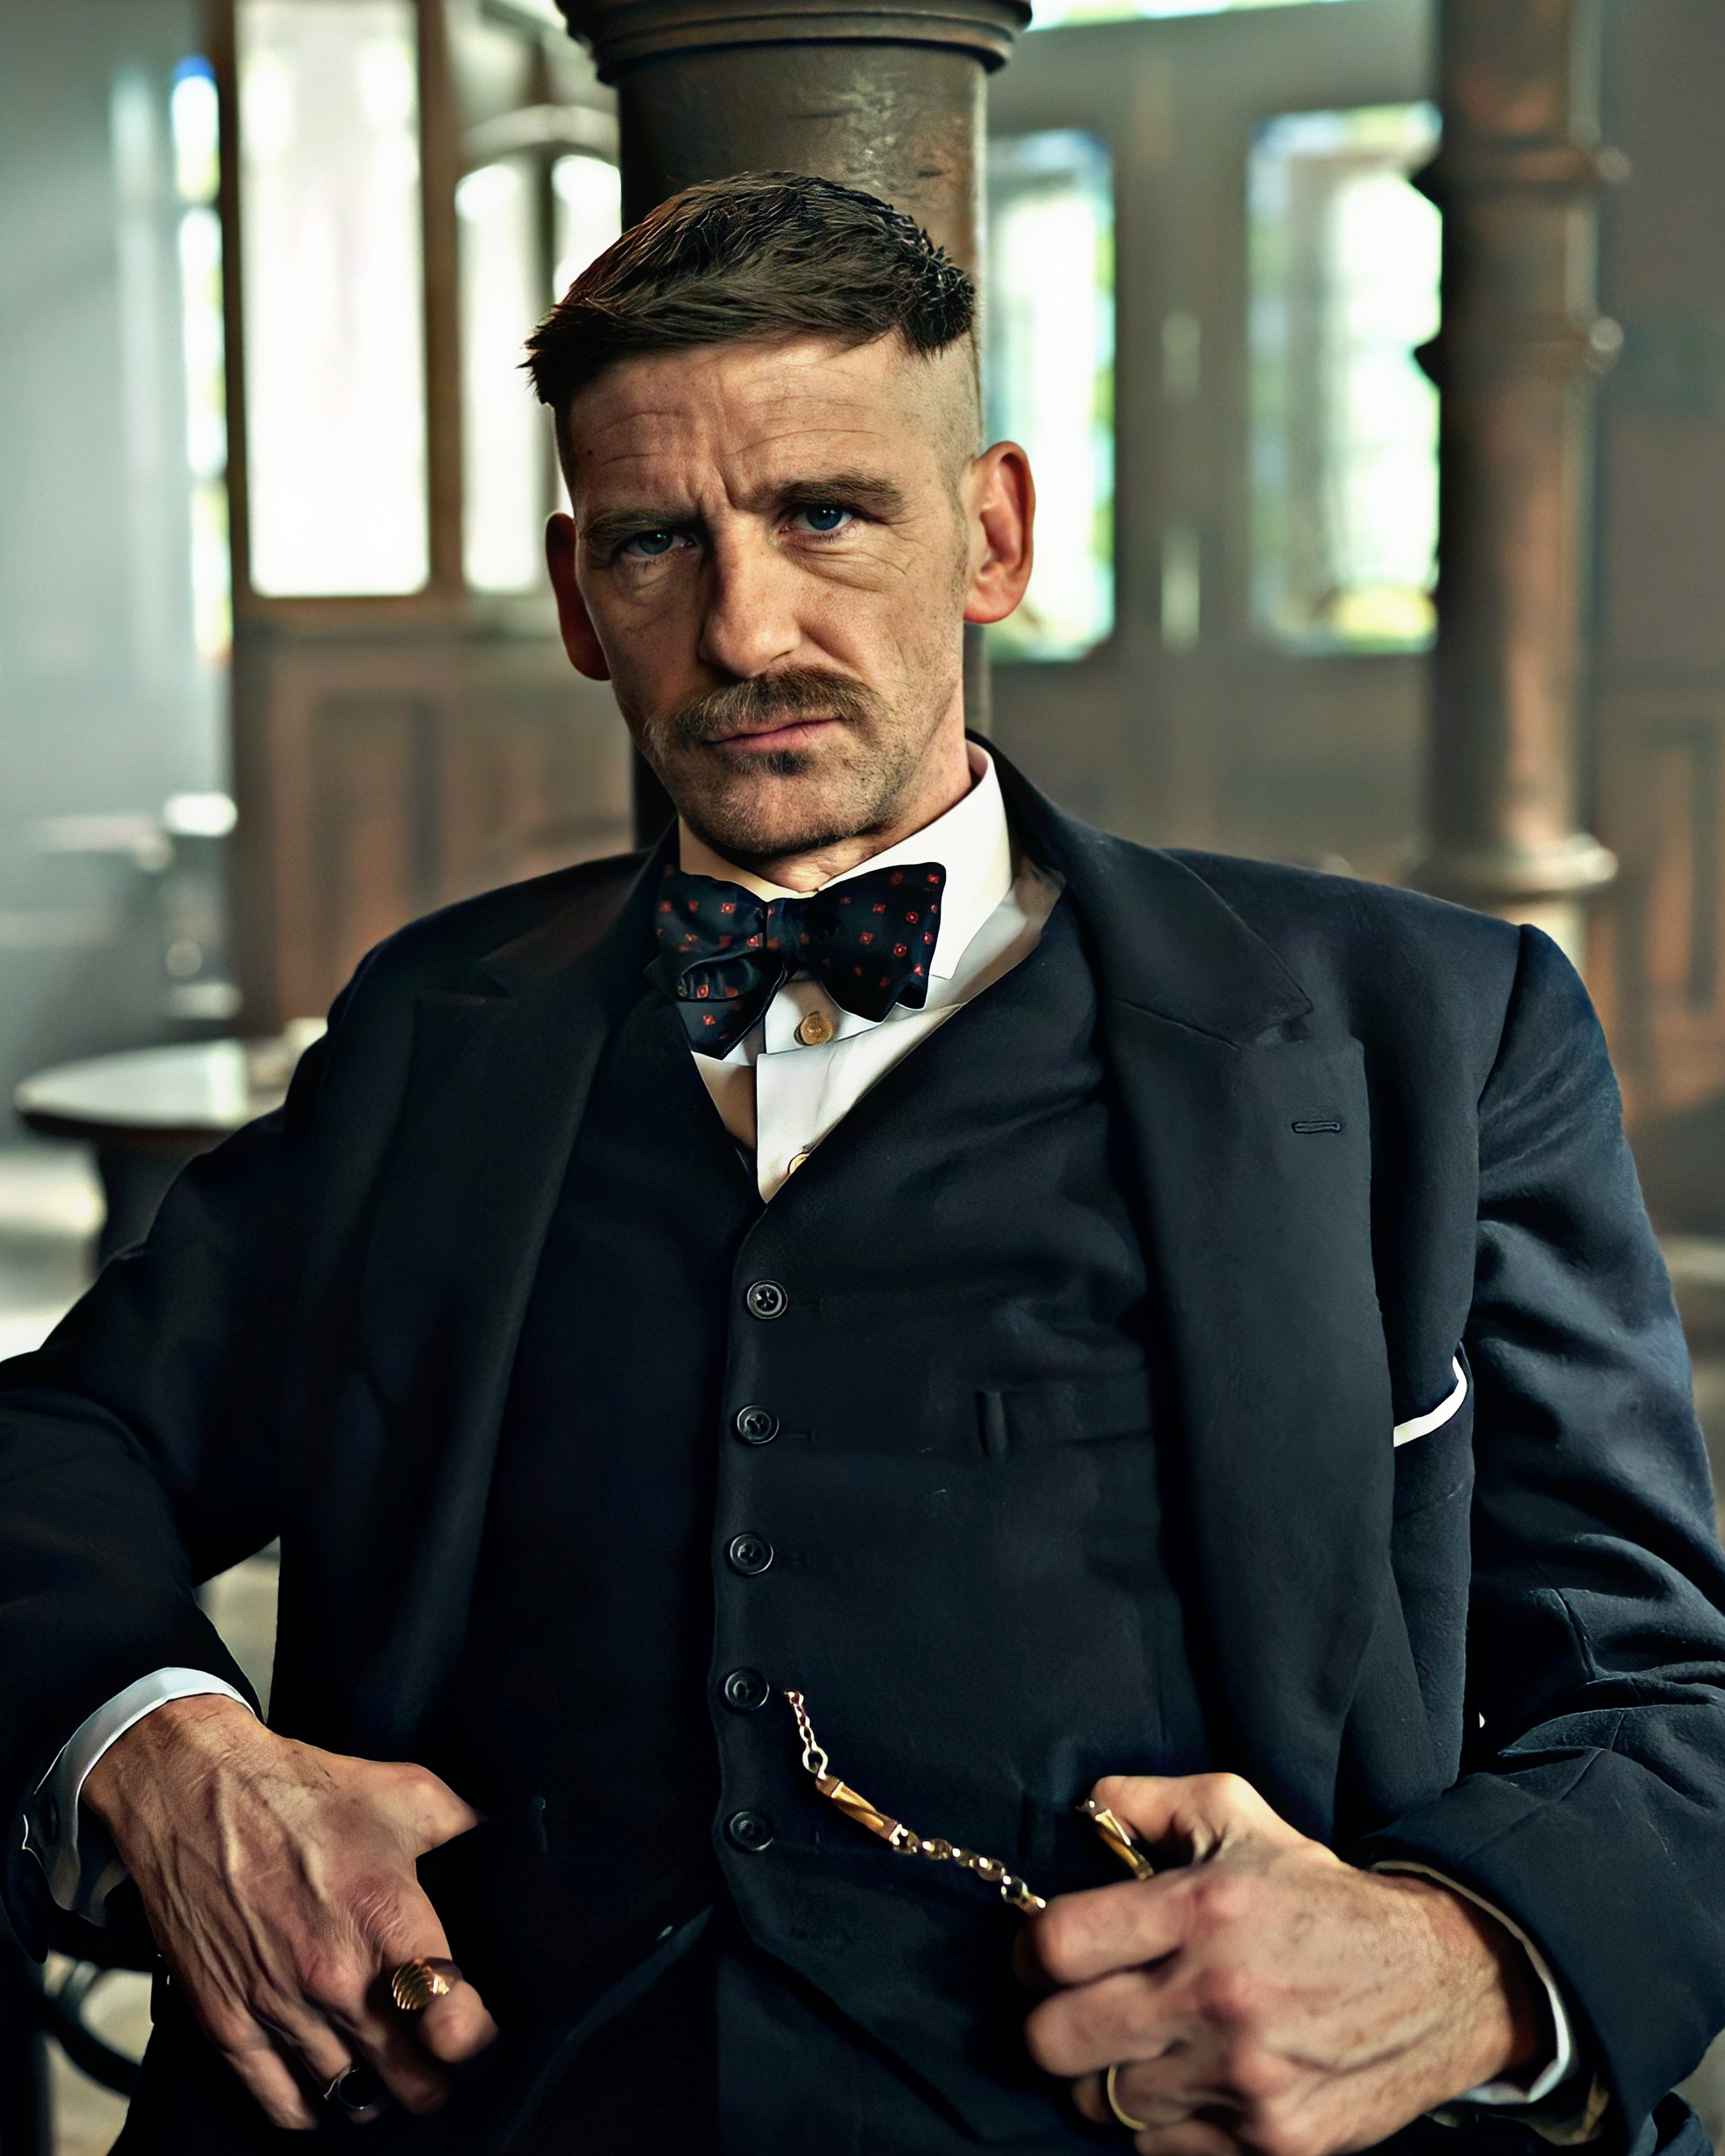 Peaky Blinders: Everything you need to know about the Shelby family show